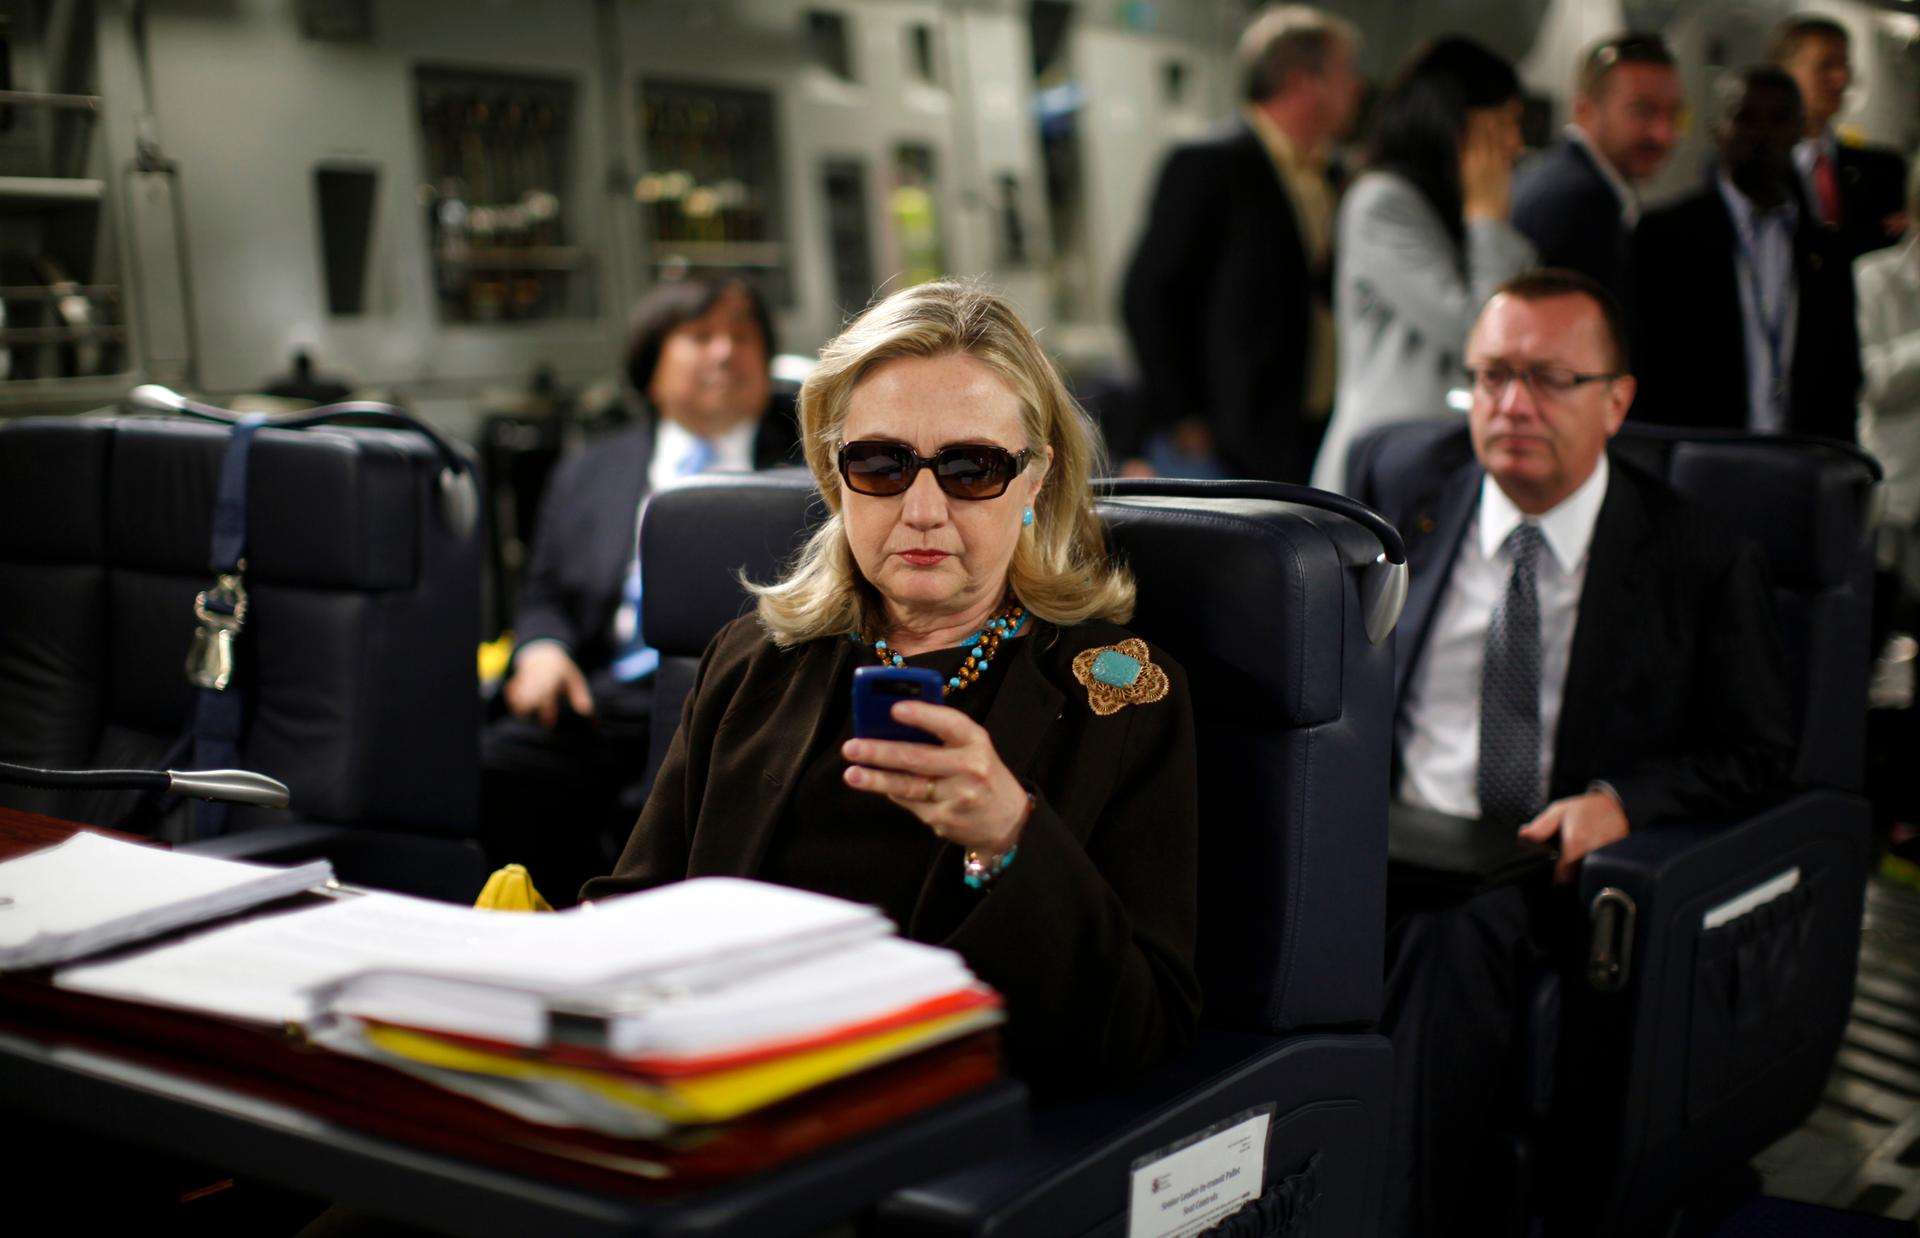 Secretary of State Hillary Clinton in a C-17 military aircraft from Malta bound for Tripoli, Libya October 18, 2011.